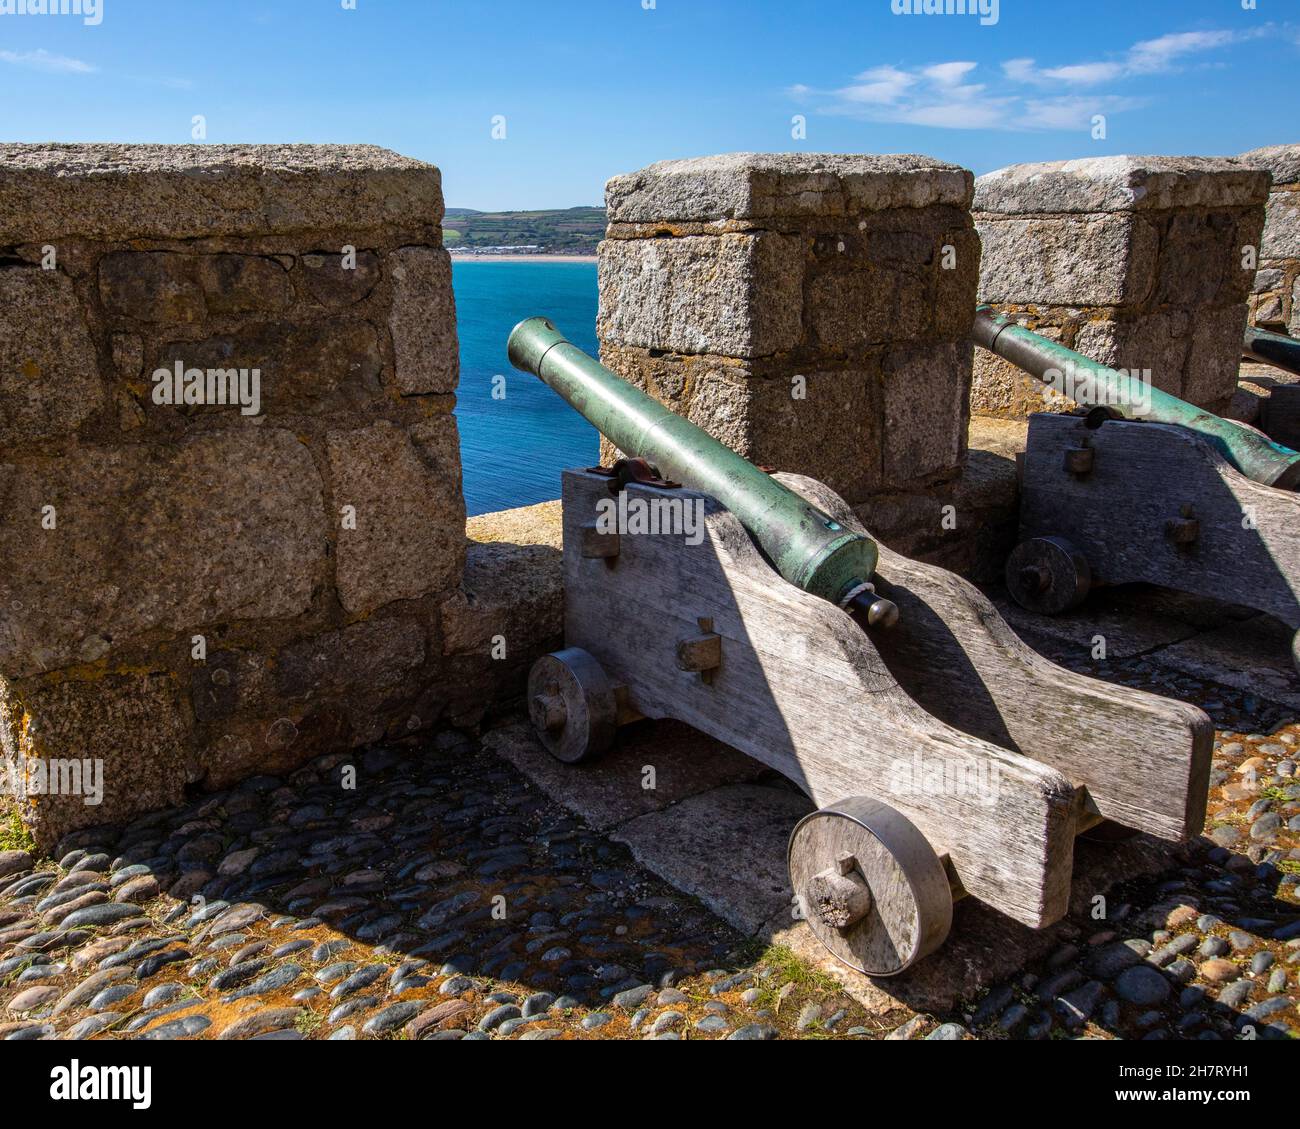 Cannons on the battlements of the castle on St. Michaels Mount in Cornwall, UK. Stock Photo